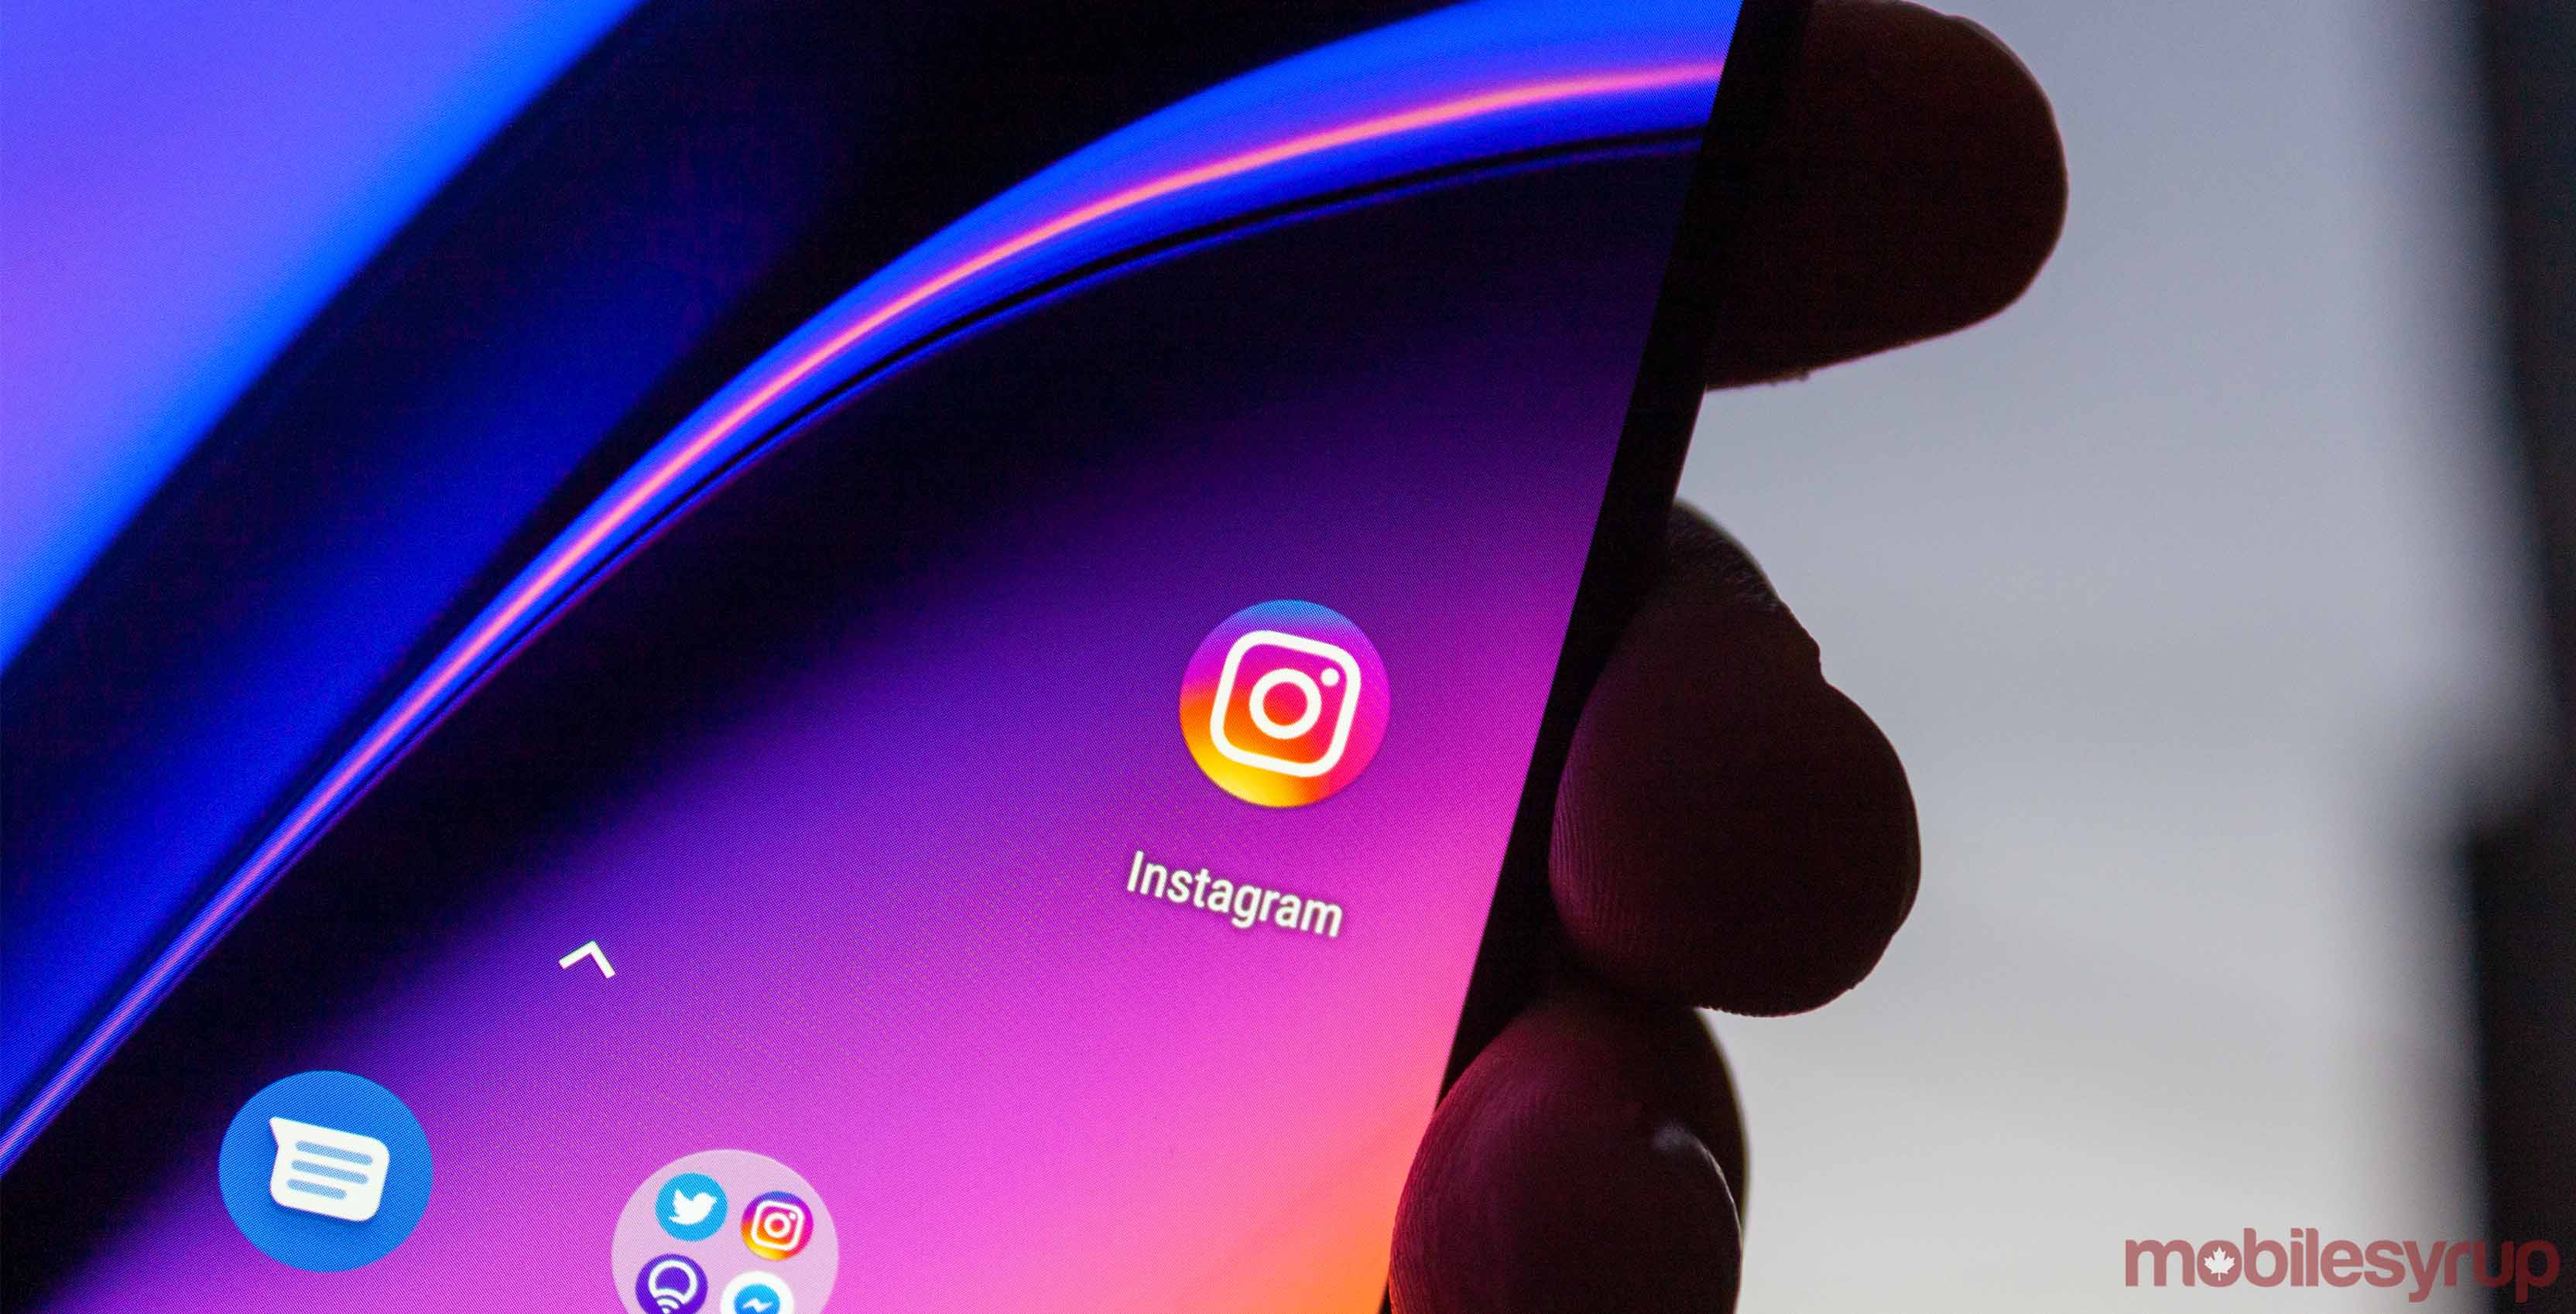 Instagram on the OnePlus 6T